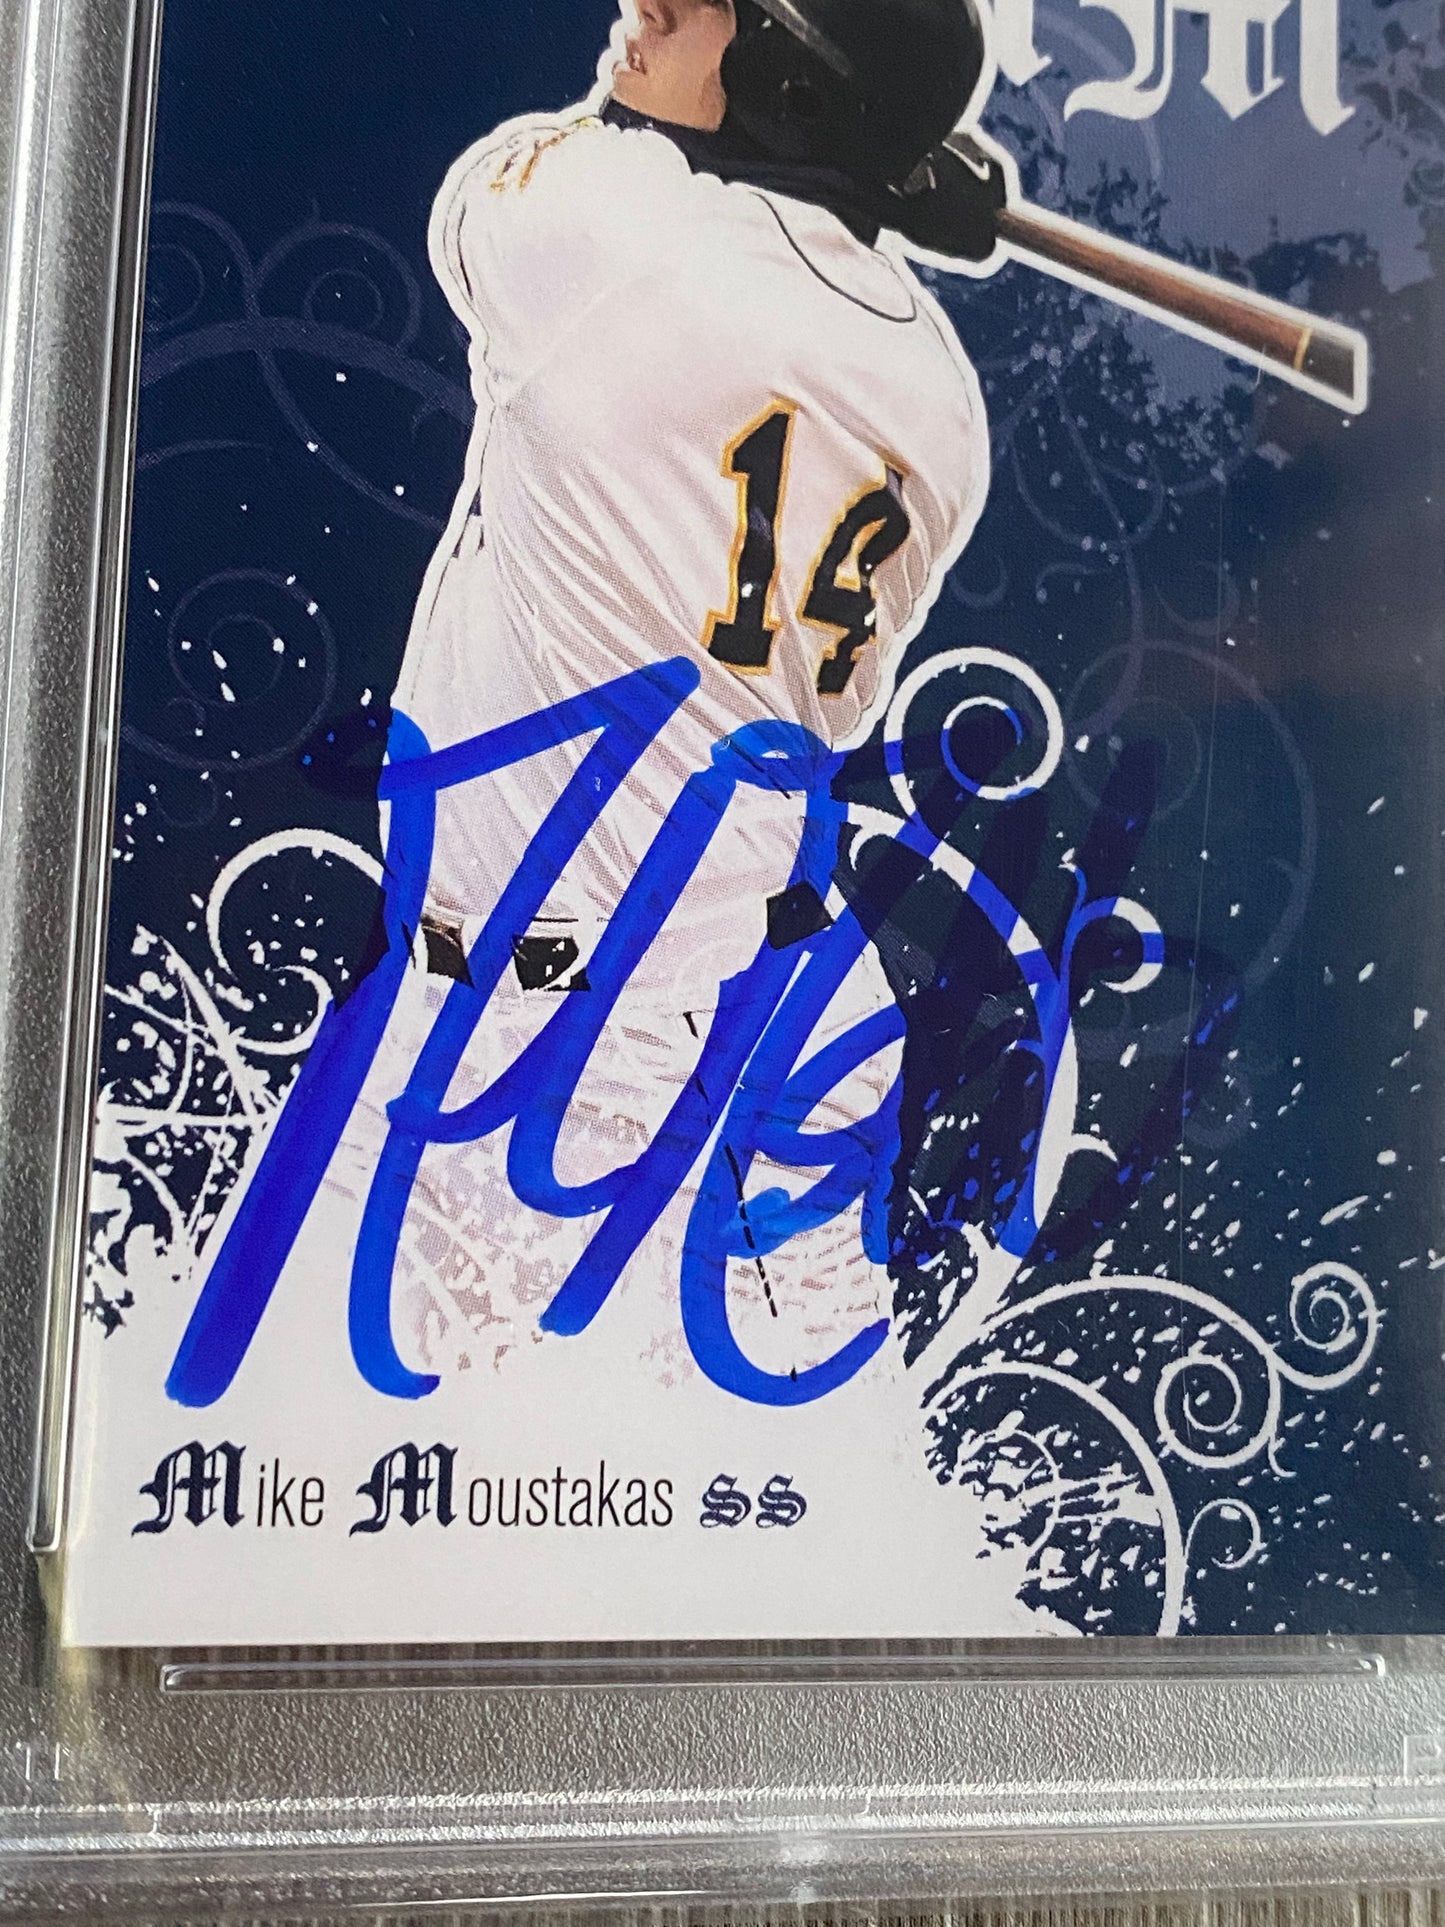 Mike Moustakas signed trading card PSA/DNA certified Authentic AUTO